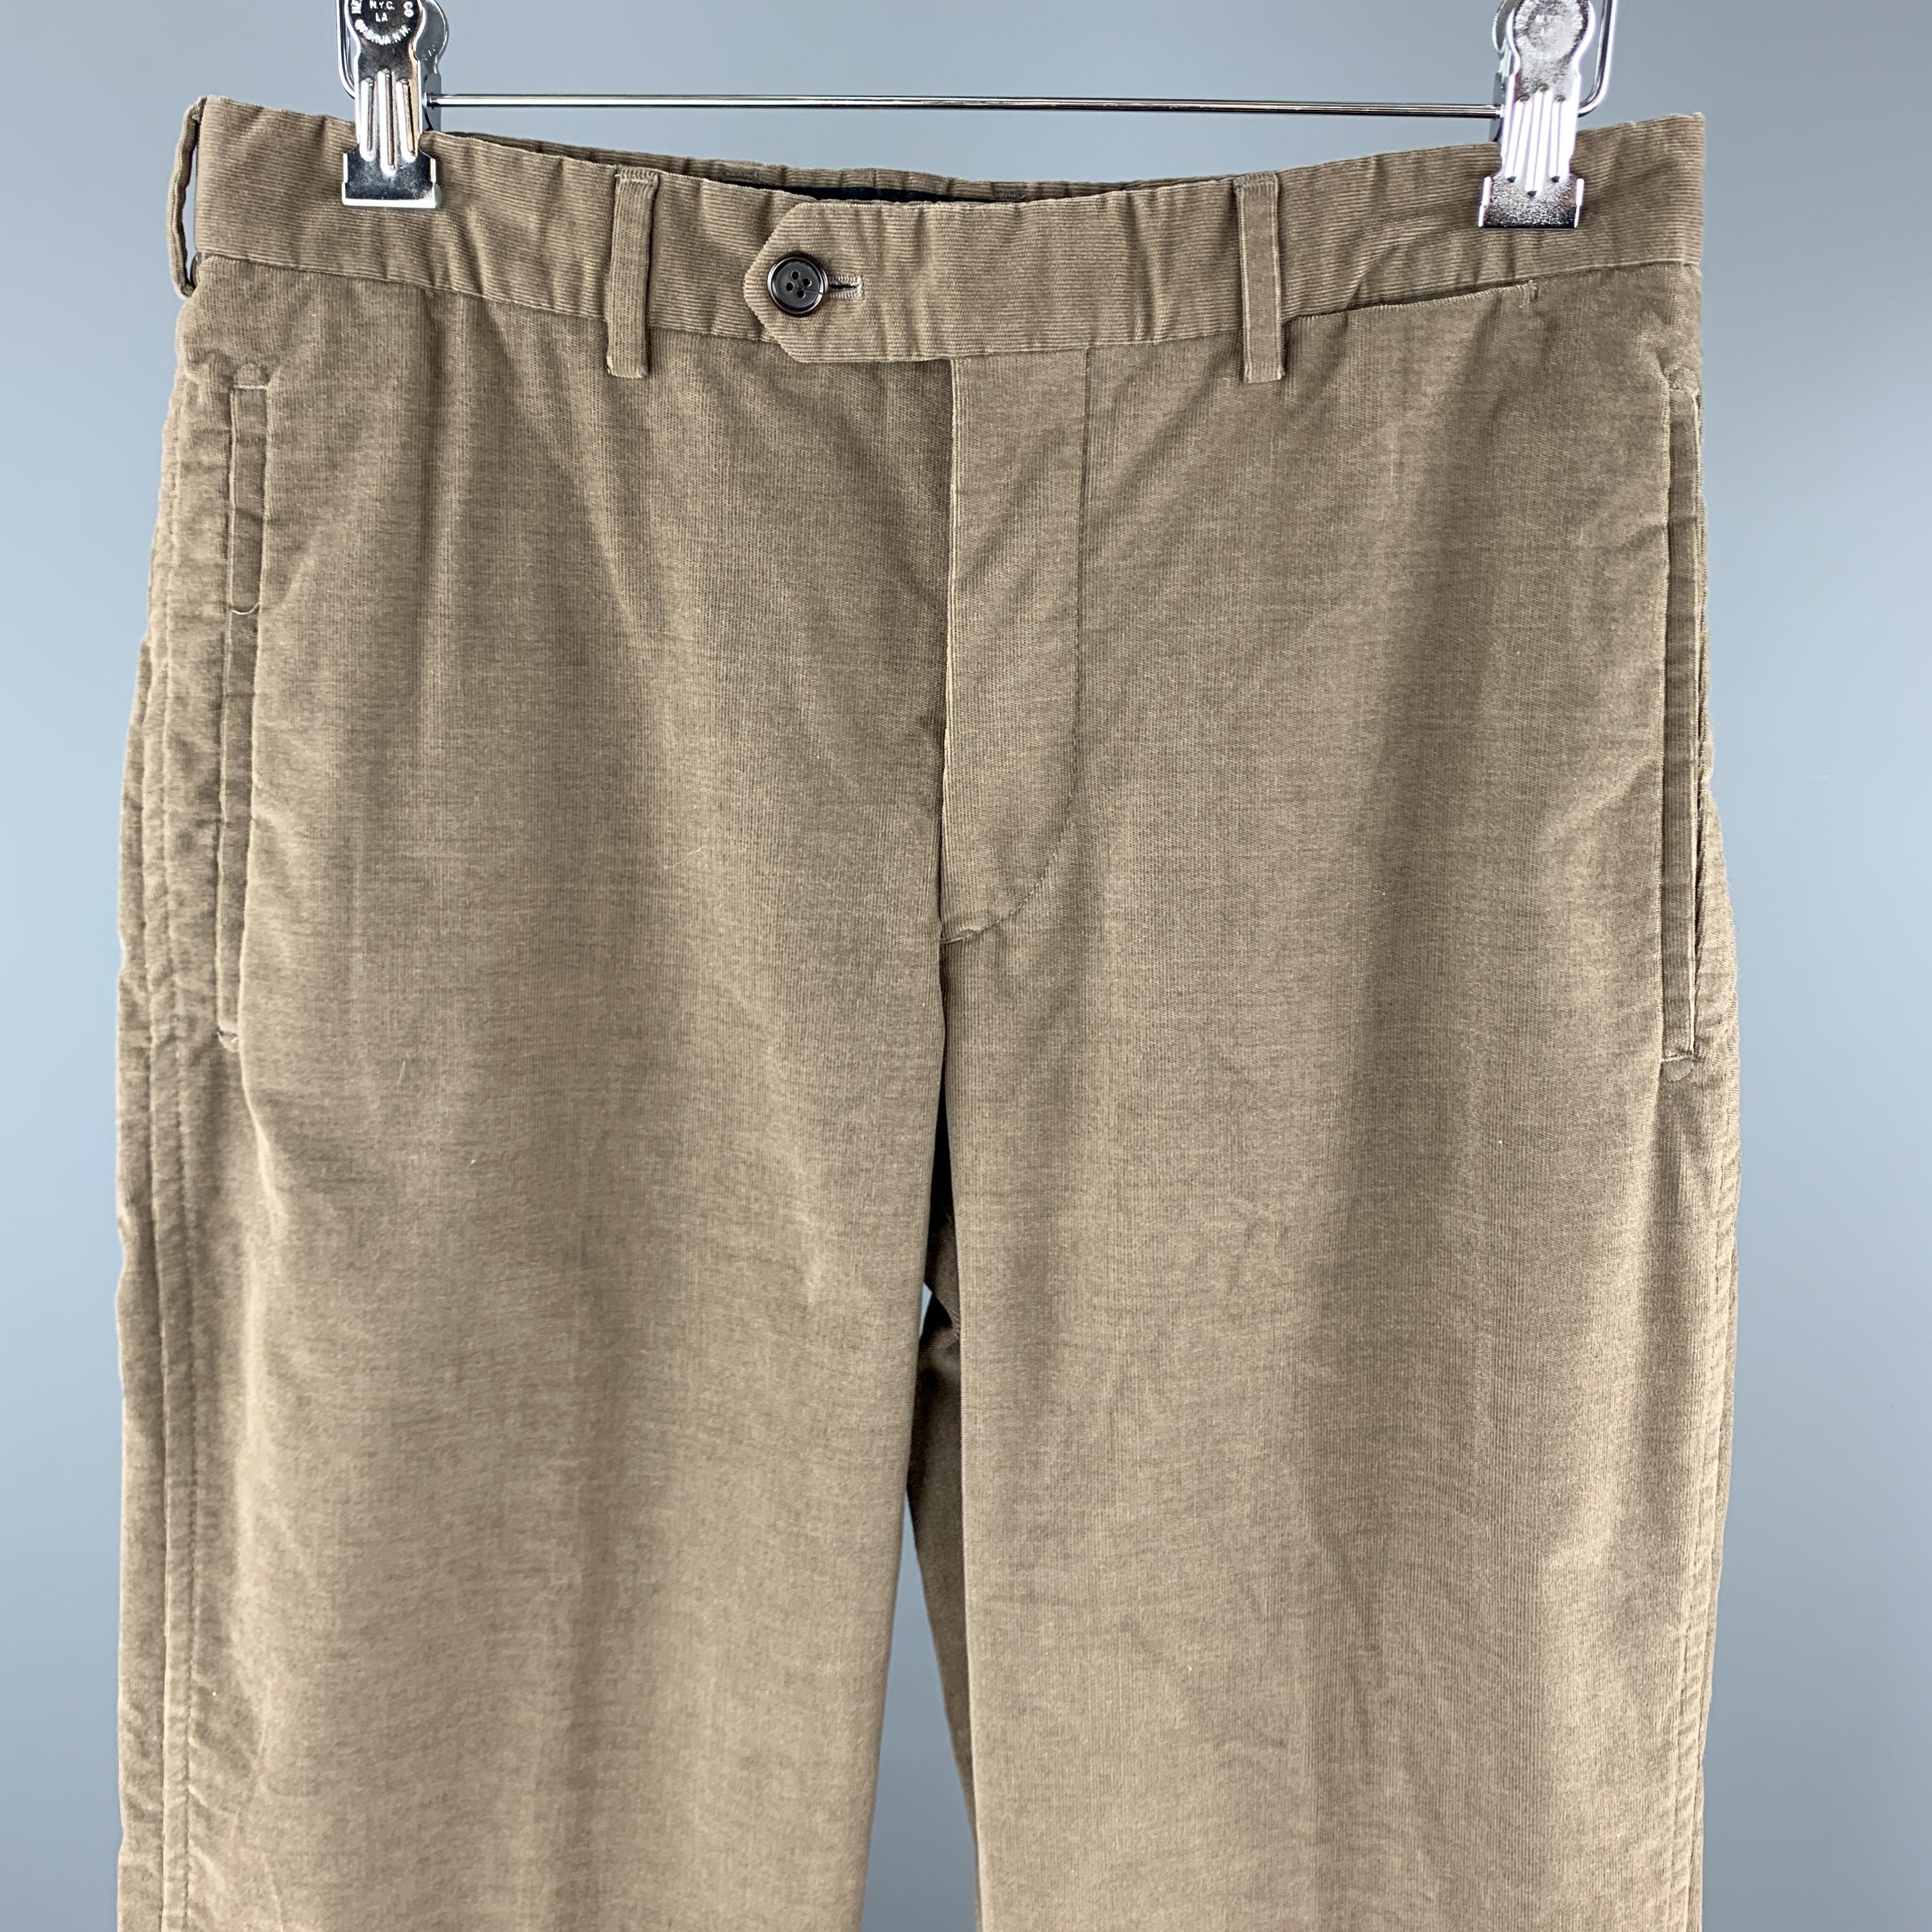 PRADA chino cut pants come in taupe corduroy with a straight leg, zip fly, and tab waistband. Made in Italy.

Very Good Pre-Owned Condition.
Marked: IT 46

Measurements:

Waist: 30 in.
Rise: 10 in.
Inseam: 31 in.